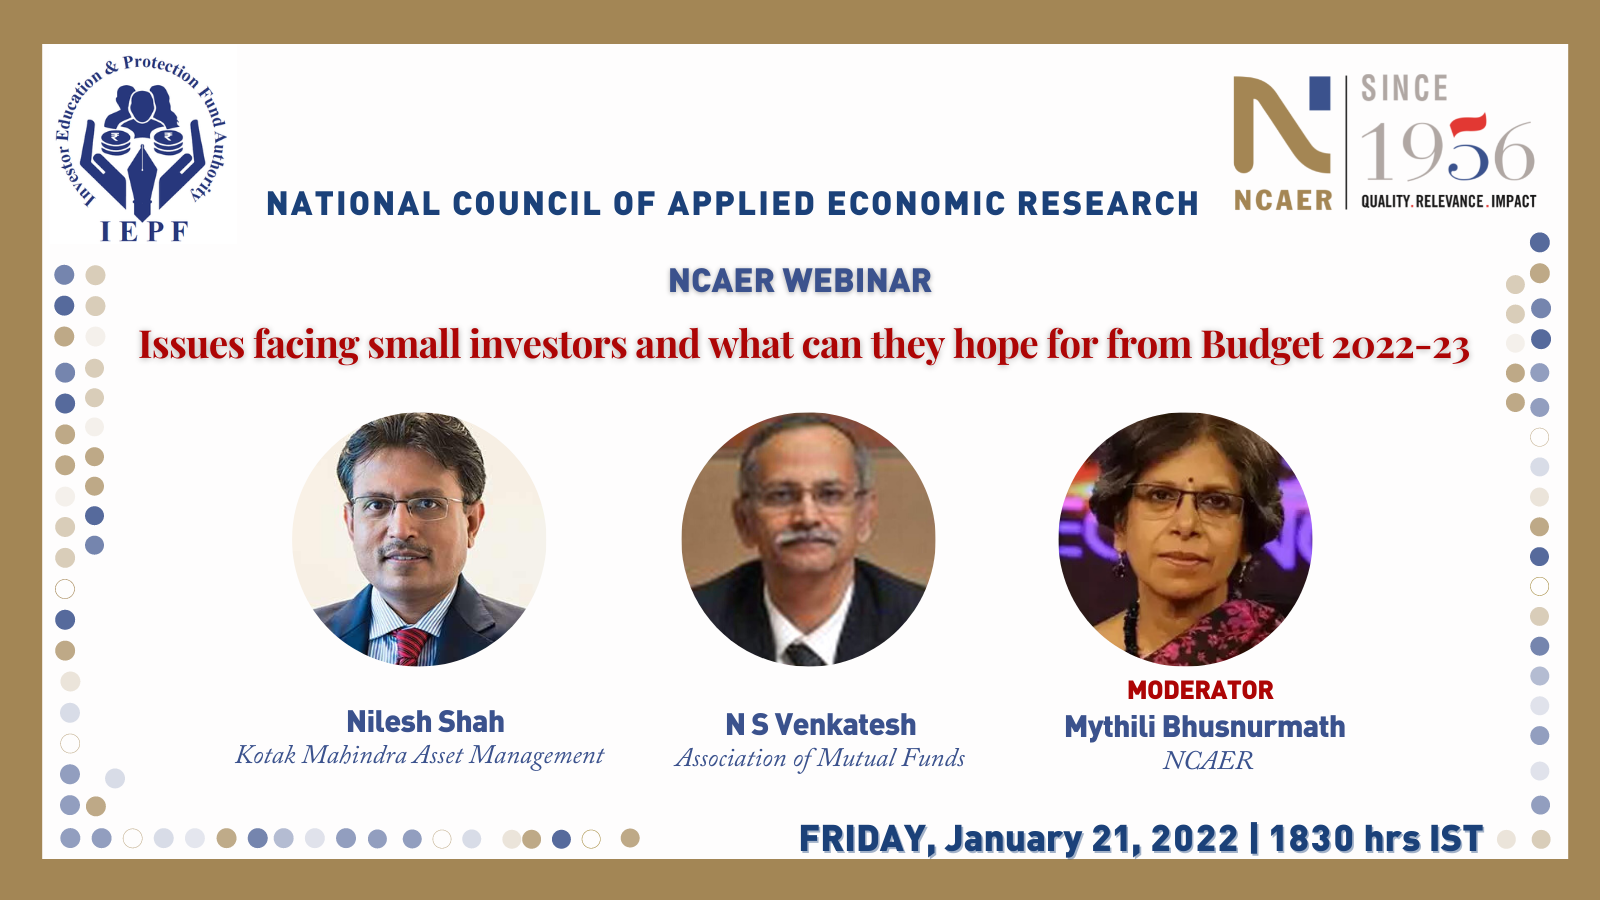 NCAER Webinar on Issues facing small investors and what can they hope for from Budget 22-23